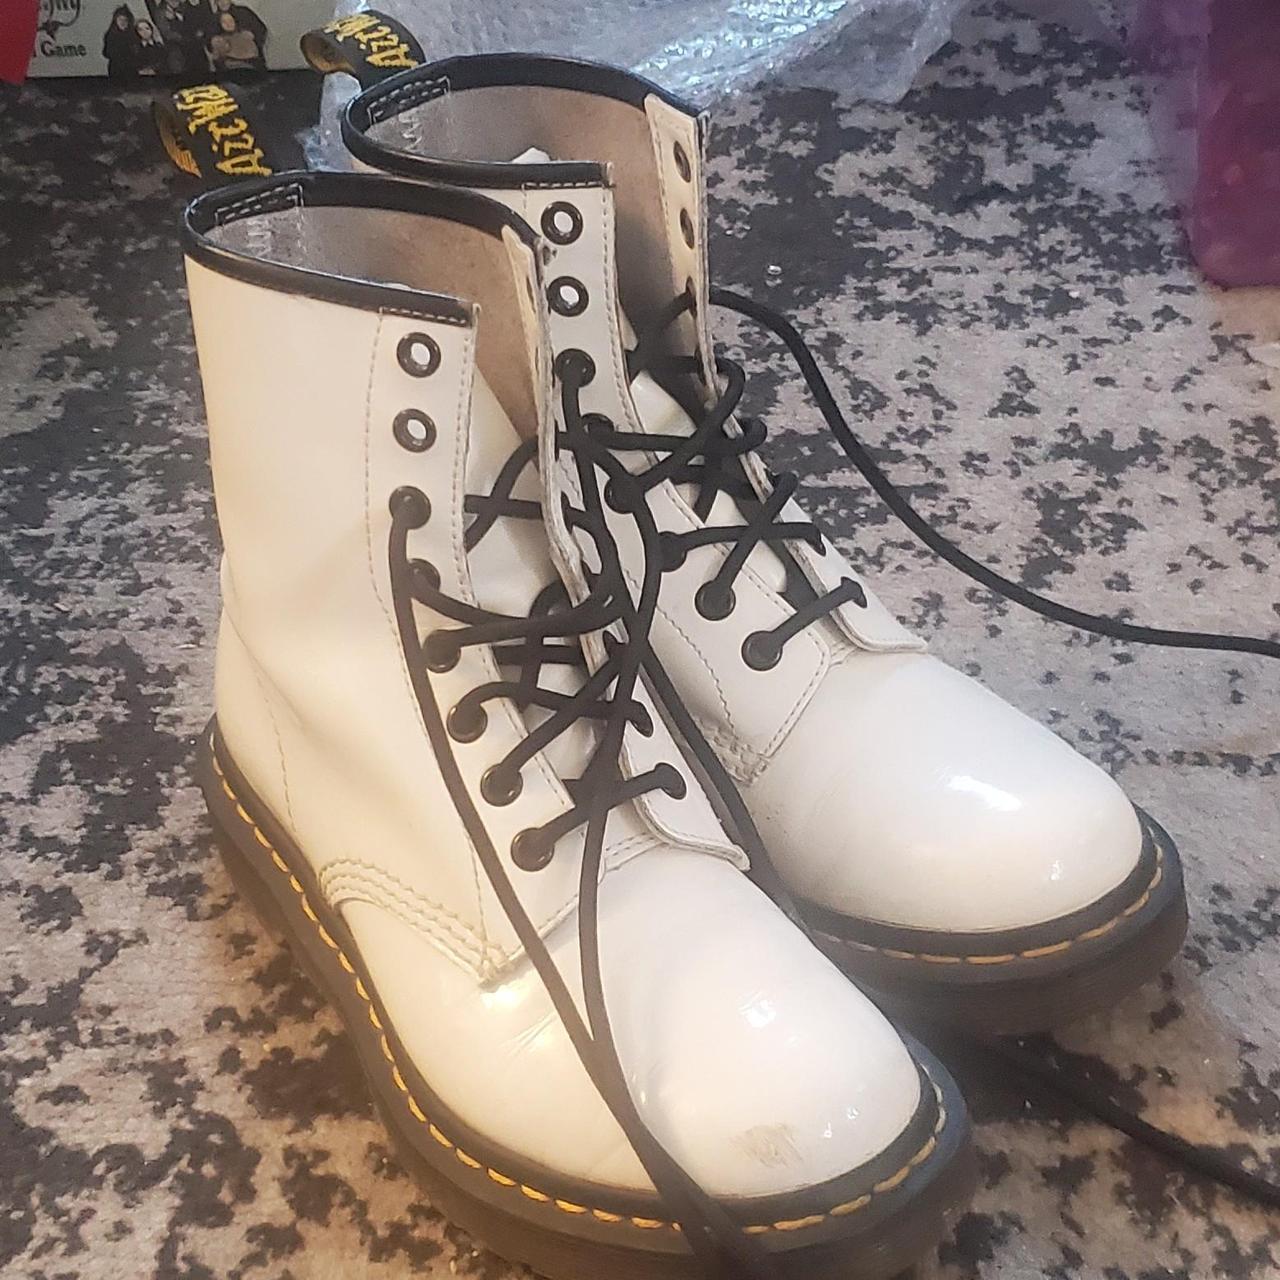 Dr. Martens Women's White and Black Boots | Depop